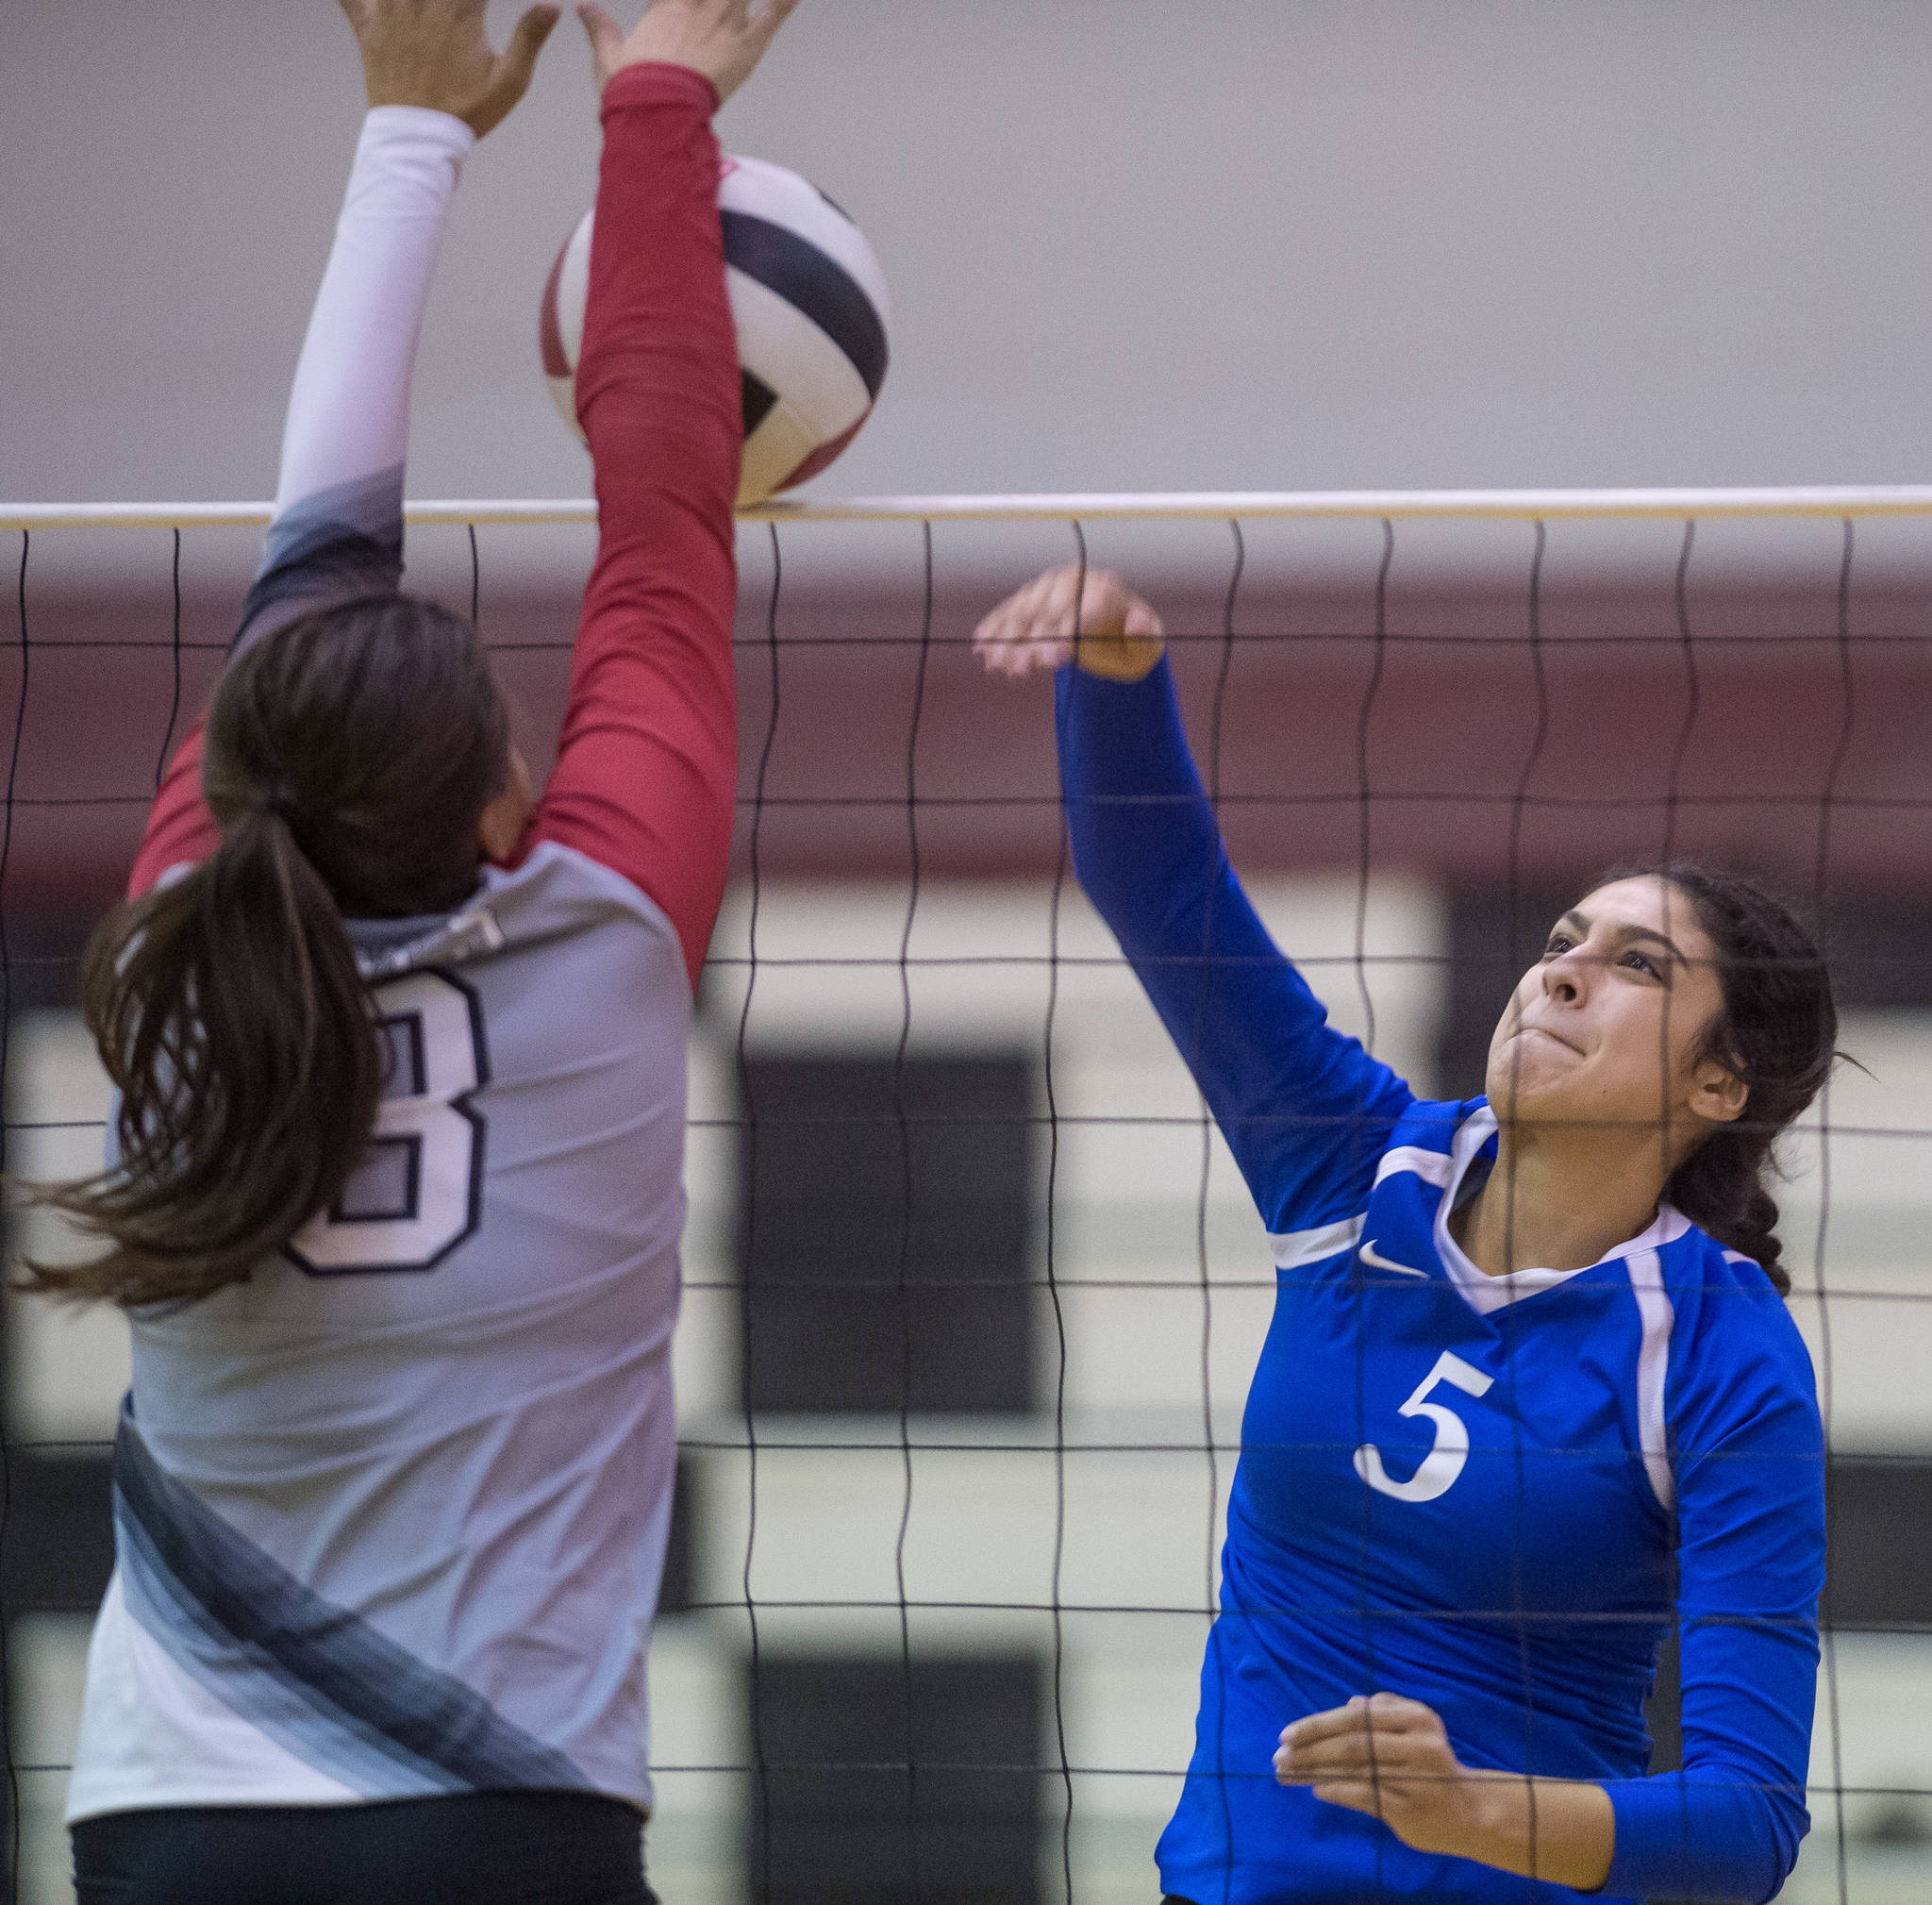 Thunder Mountain’s Maxie Saceda-Hurt, right, has her spike blocked by Wrangell’s Anna Allen at the Juneau Invitational Volleyball Extravaganza at JDHS on Friday, Oct. 13, 2017. (Michael Penn | Juneau Empire)